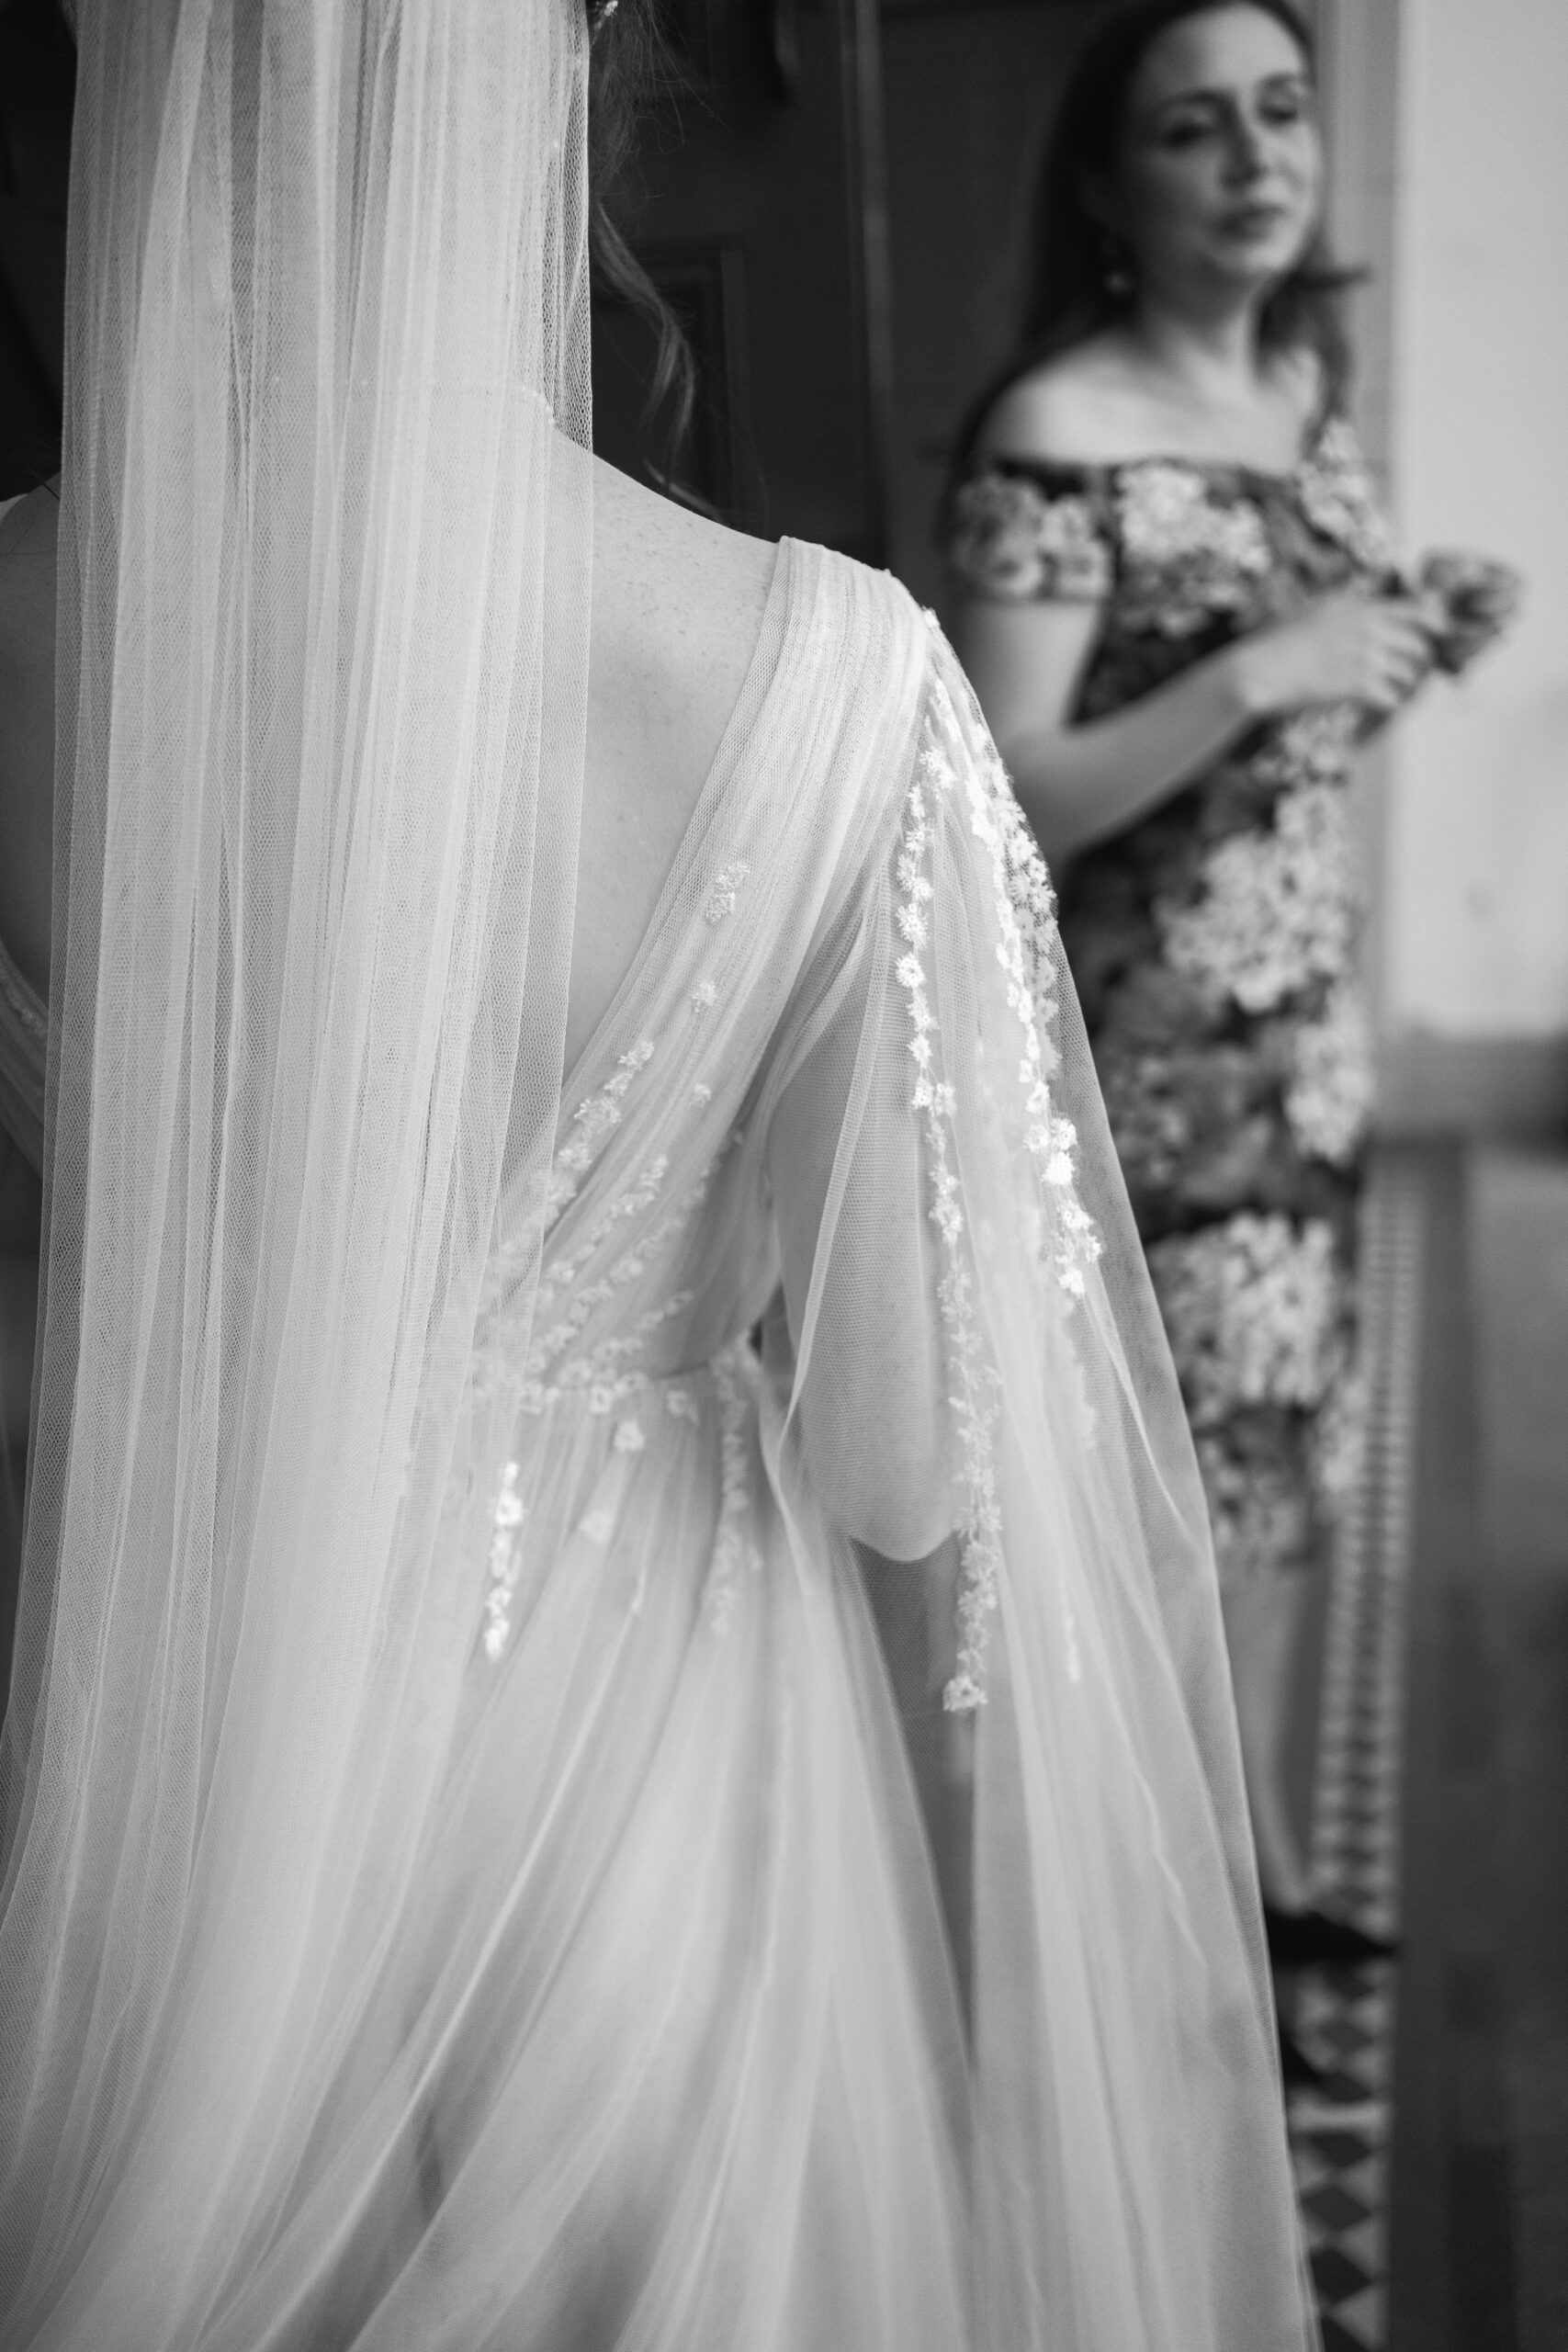 black and white close up detail photograph of a bride wearing an Anna kara dress with sheer sleeves